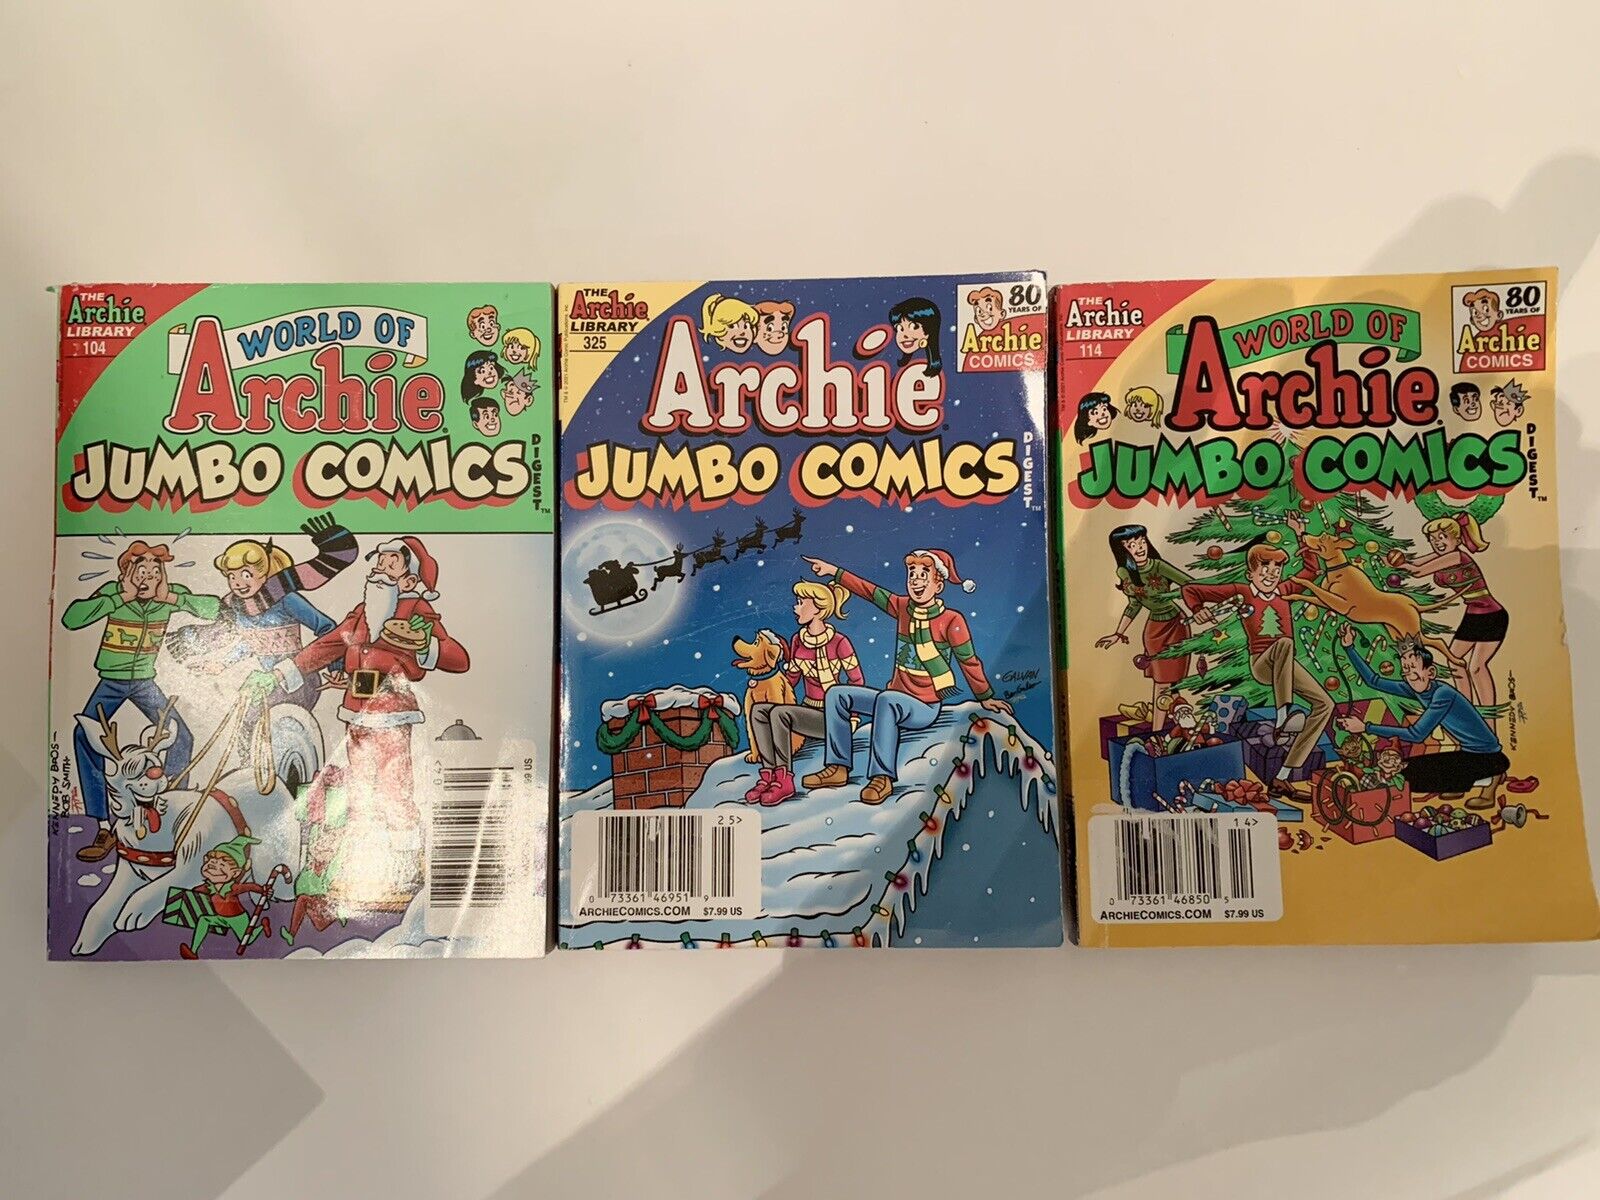 World of ARCHIE JUMBO COMICS Lot Of 3 Books Christmas #104, 114 & 325 Excellent